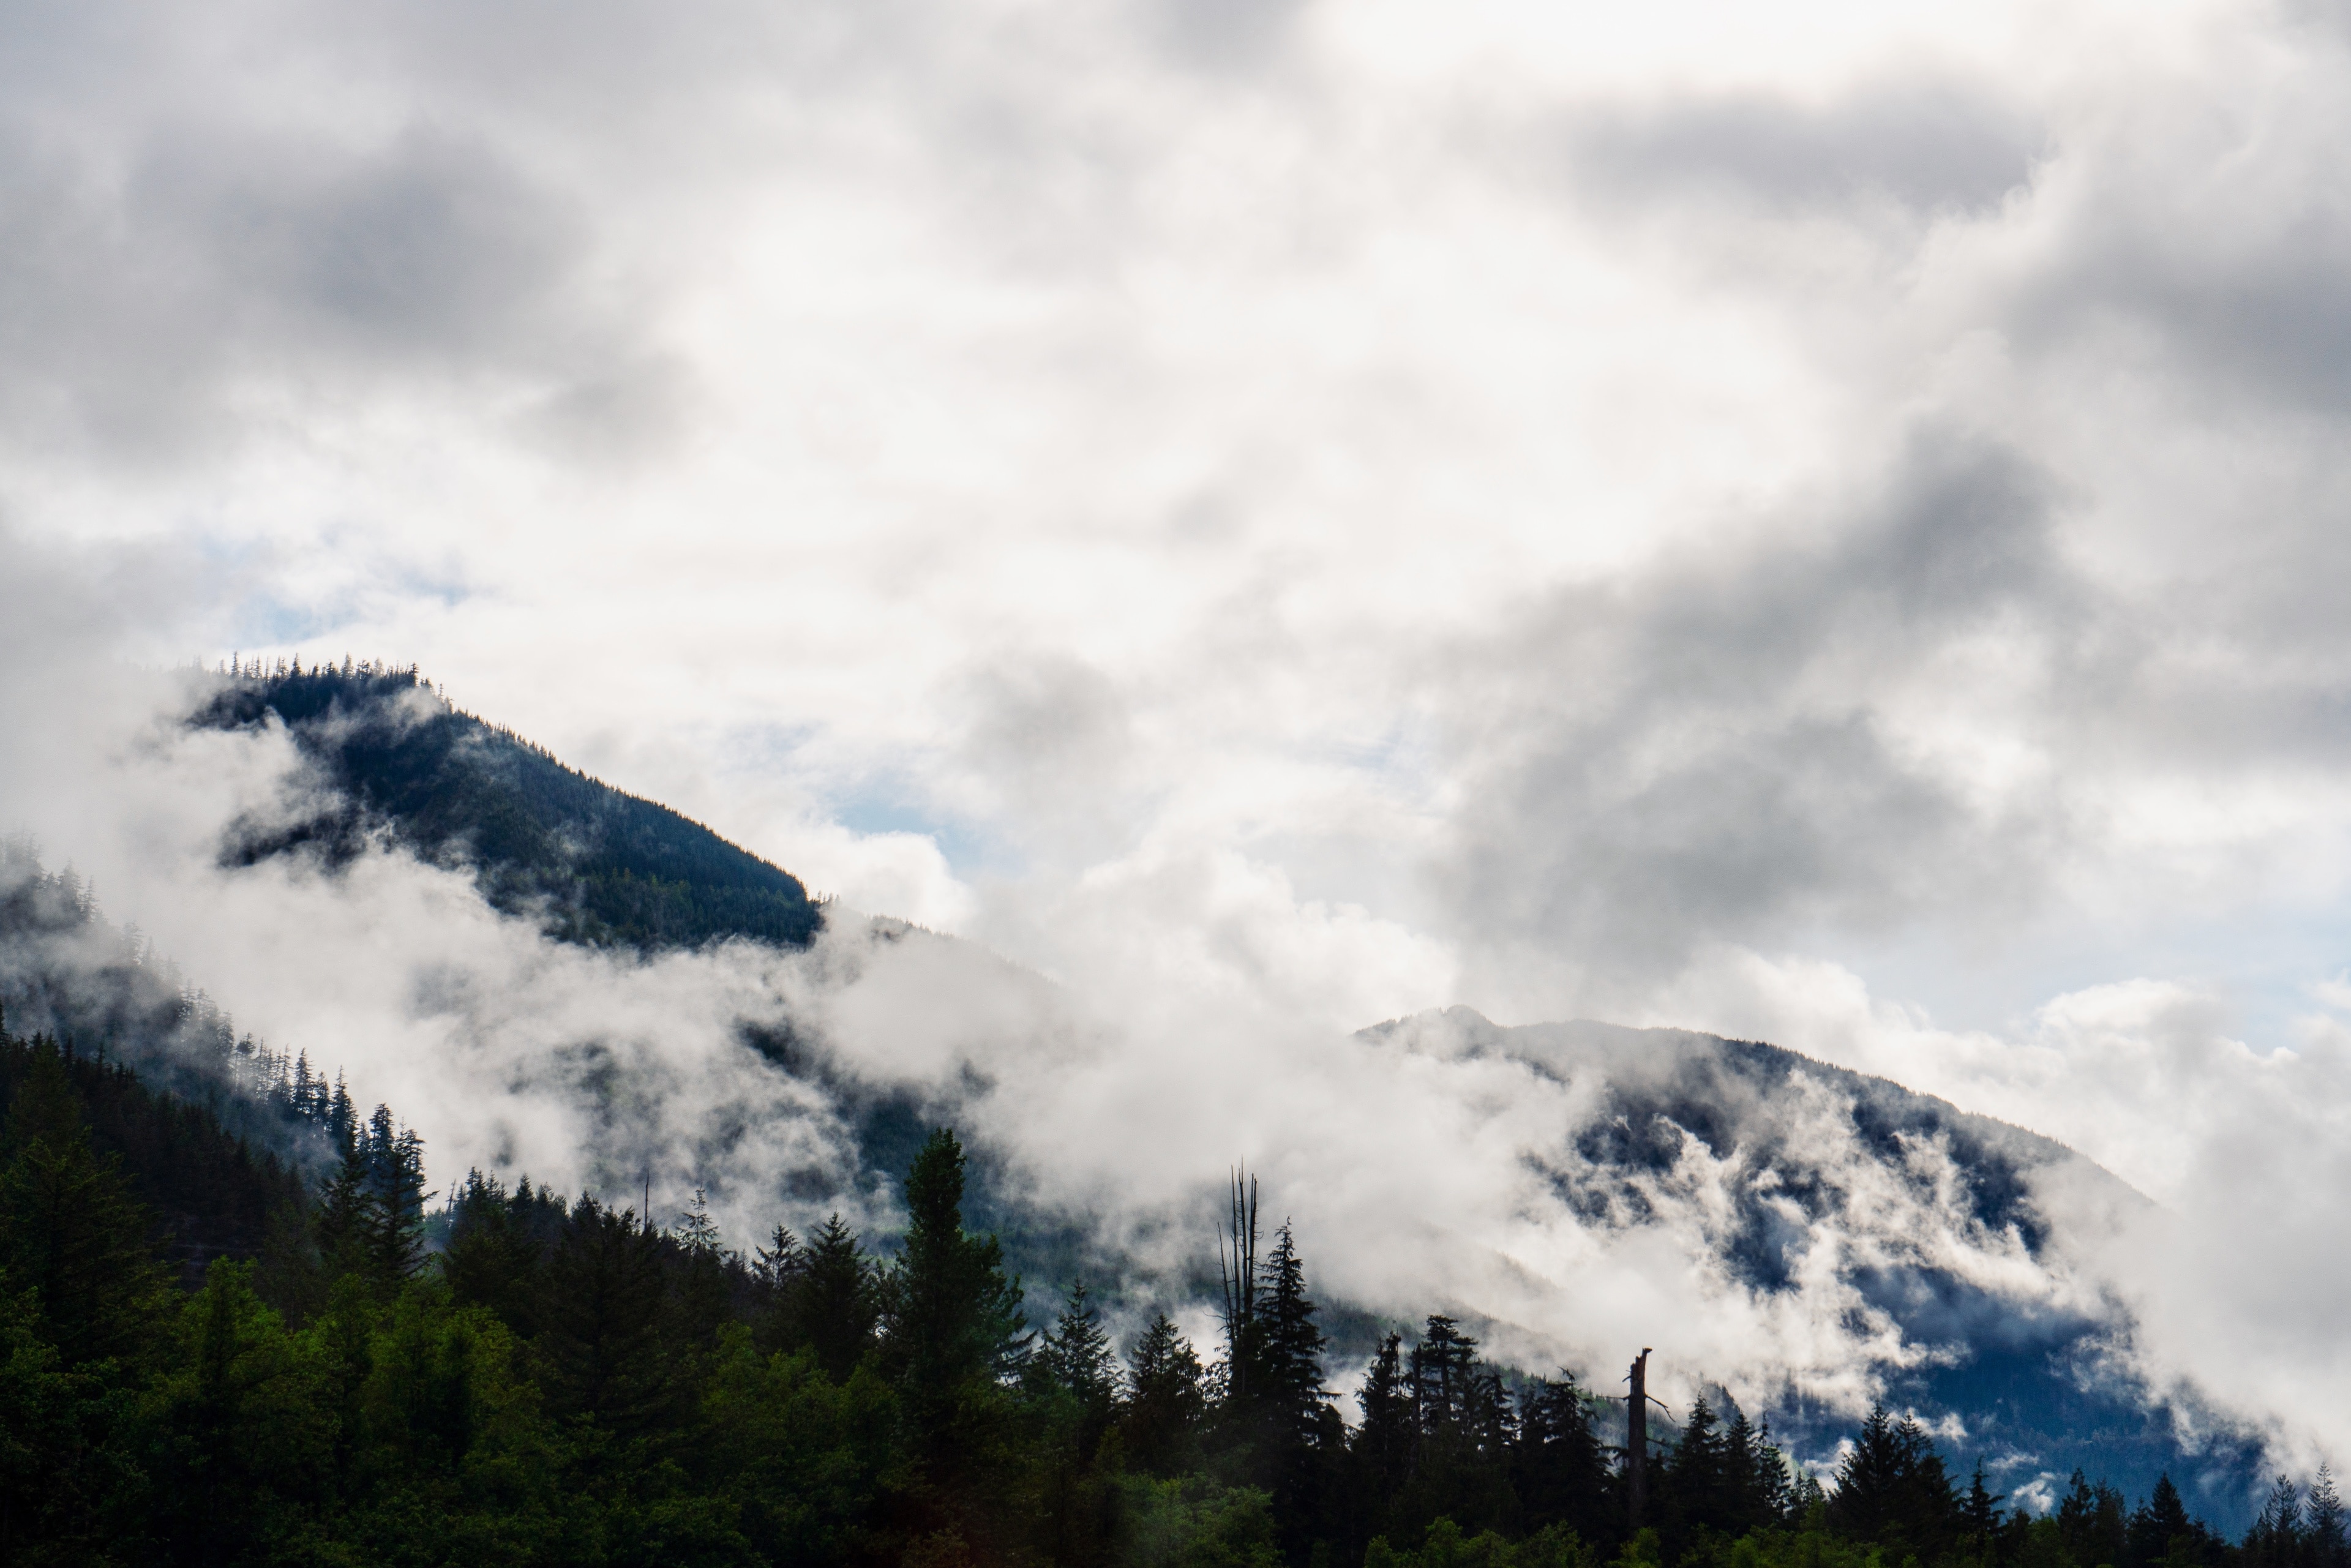 Playing hide and go seek with the Cascades. Caught these mountains peeking out from the clouds on a beautiful drive home from Snoqualmie. #Adventure #Adventure Photo Contest